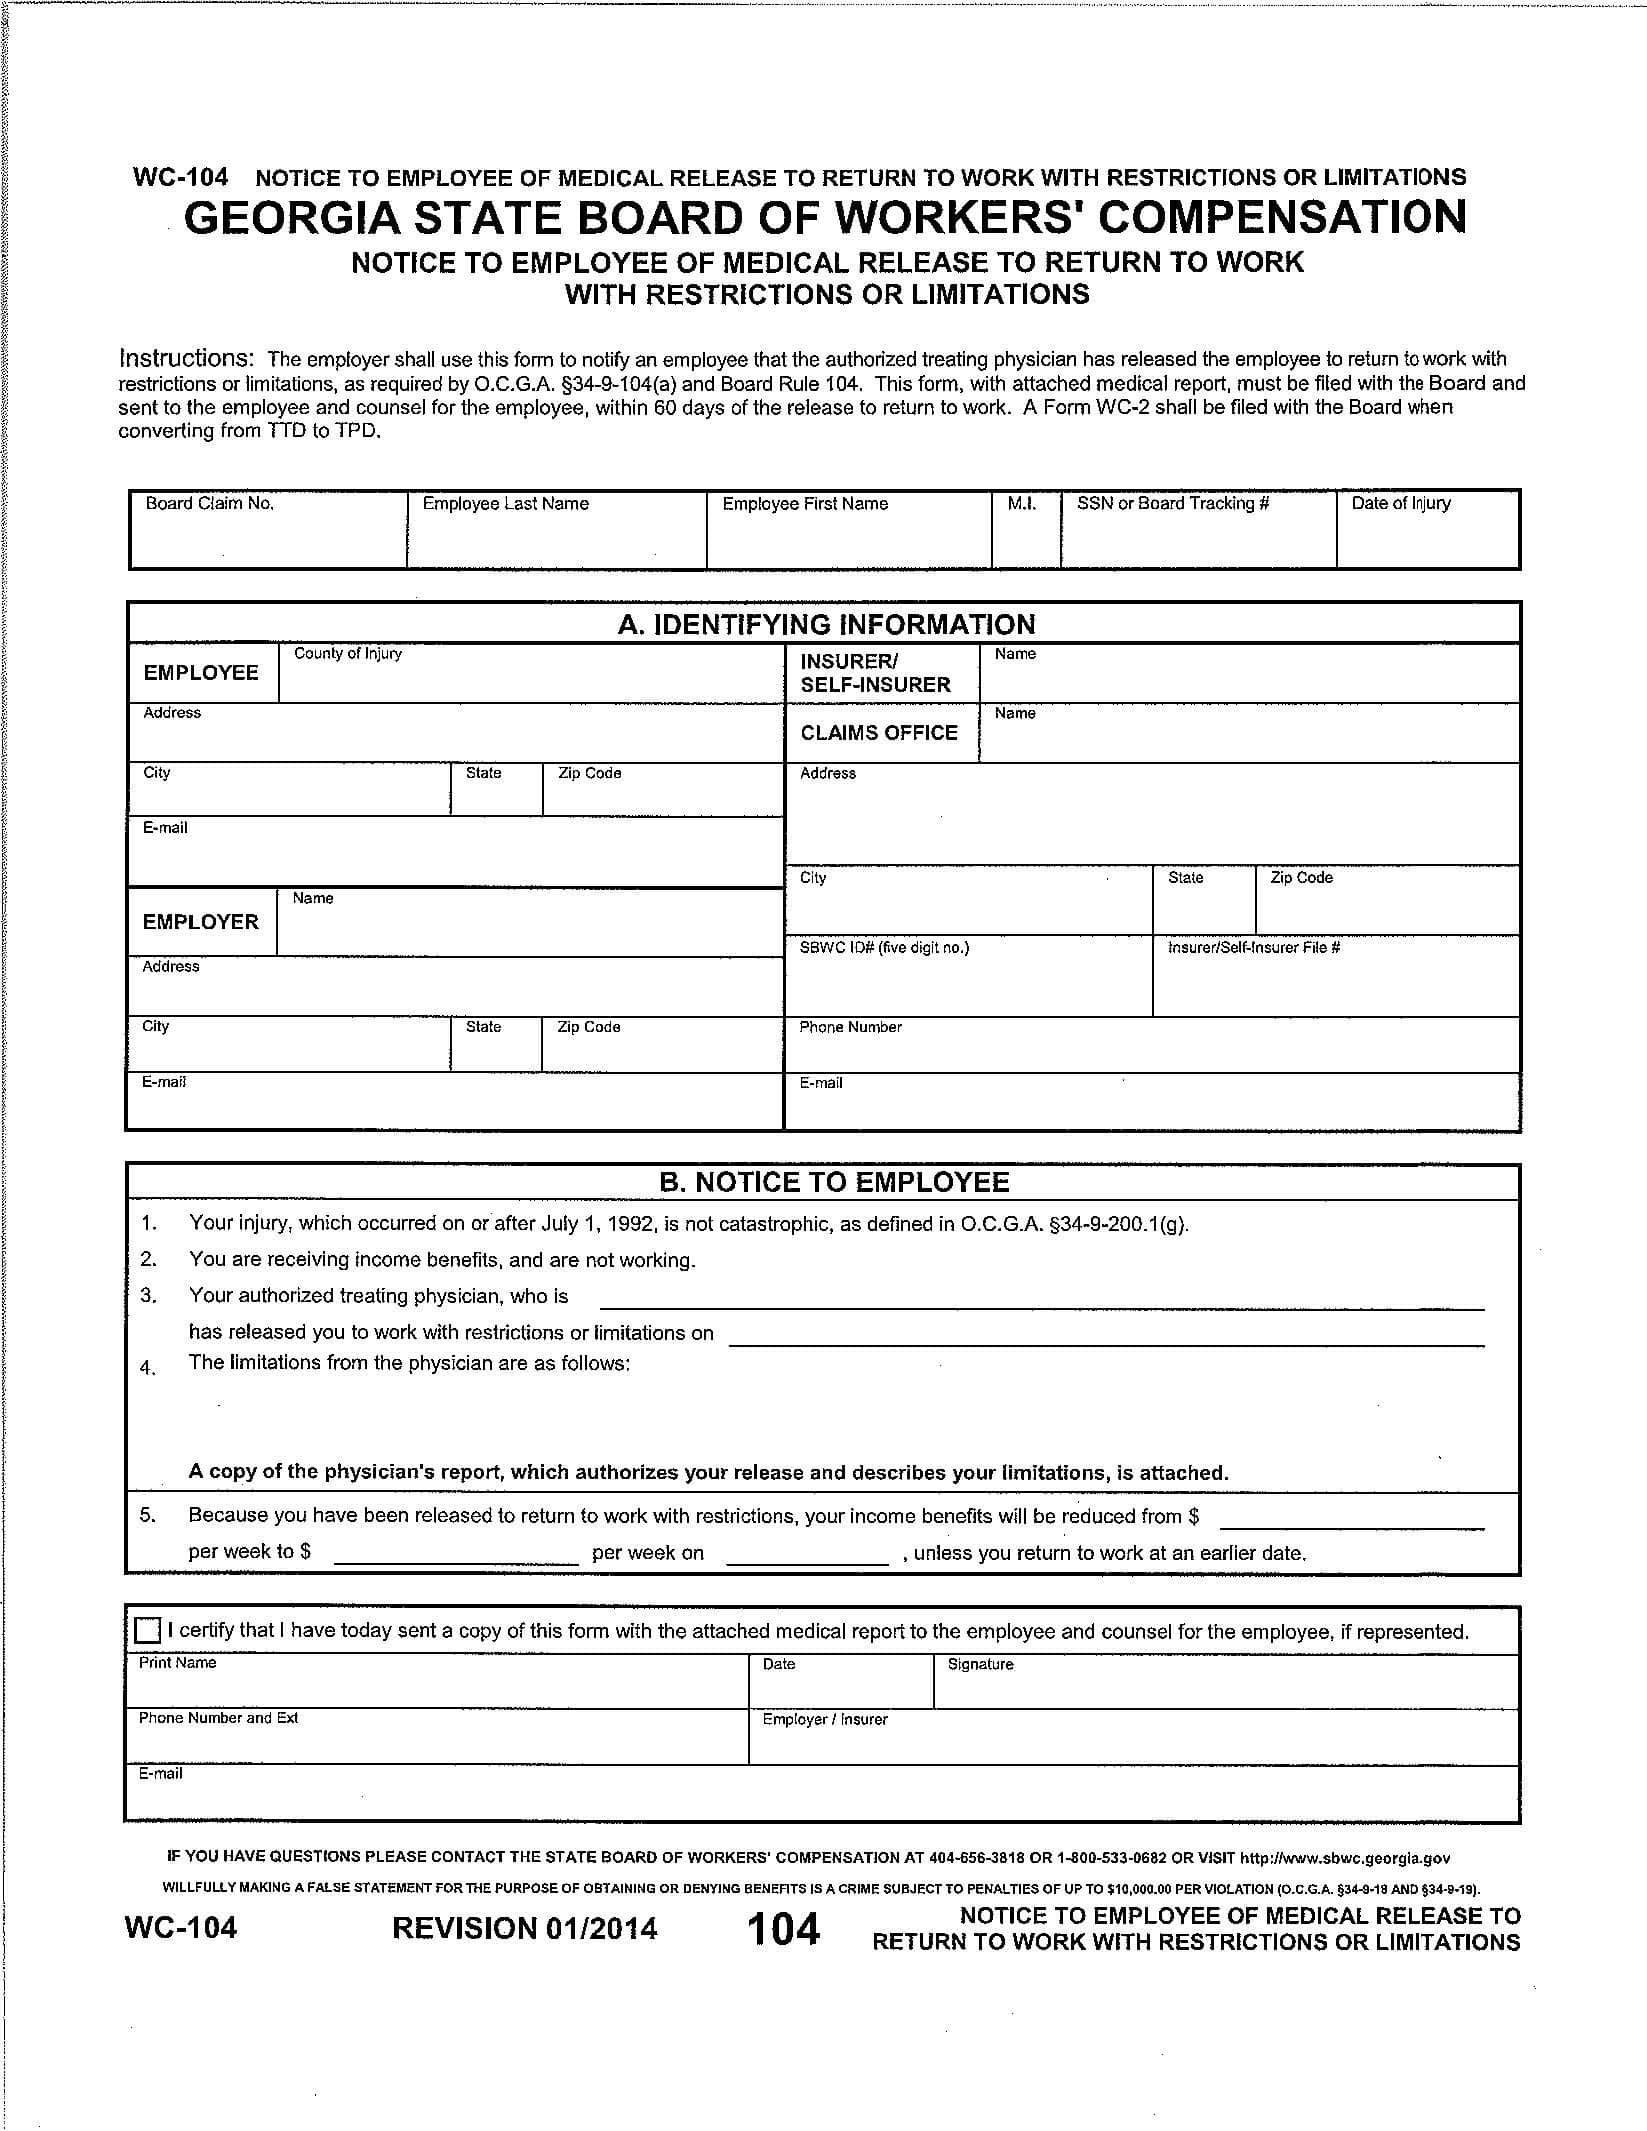 Georgia Workers' Compensation Forms WC-104, WC-240, and WC-R1